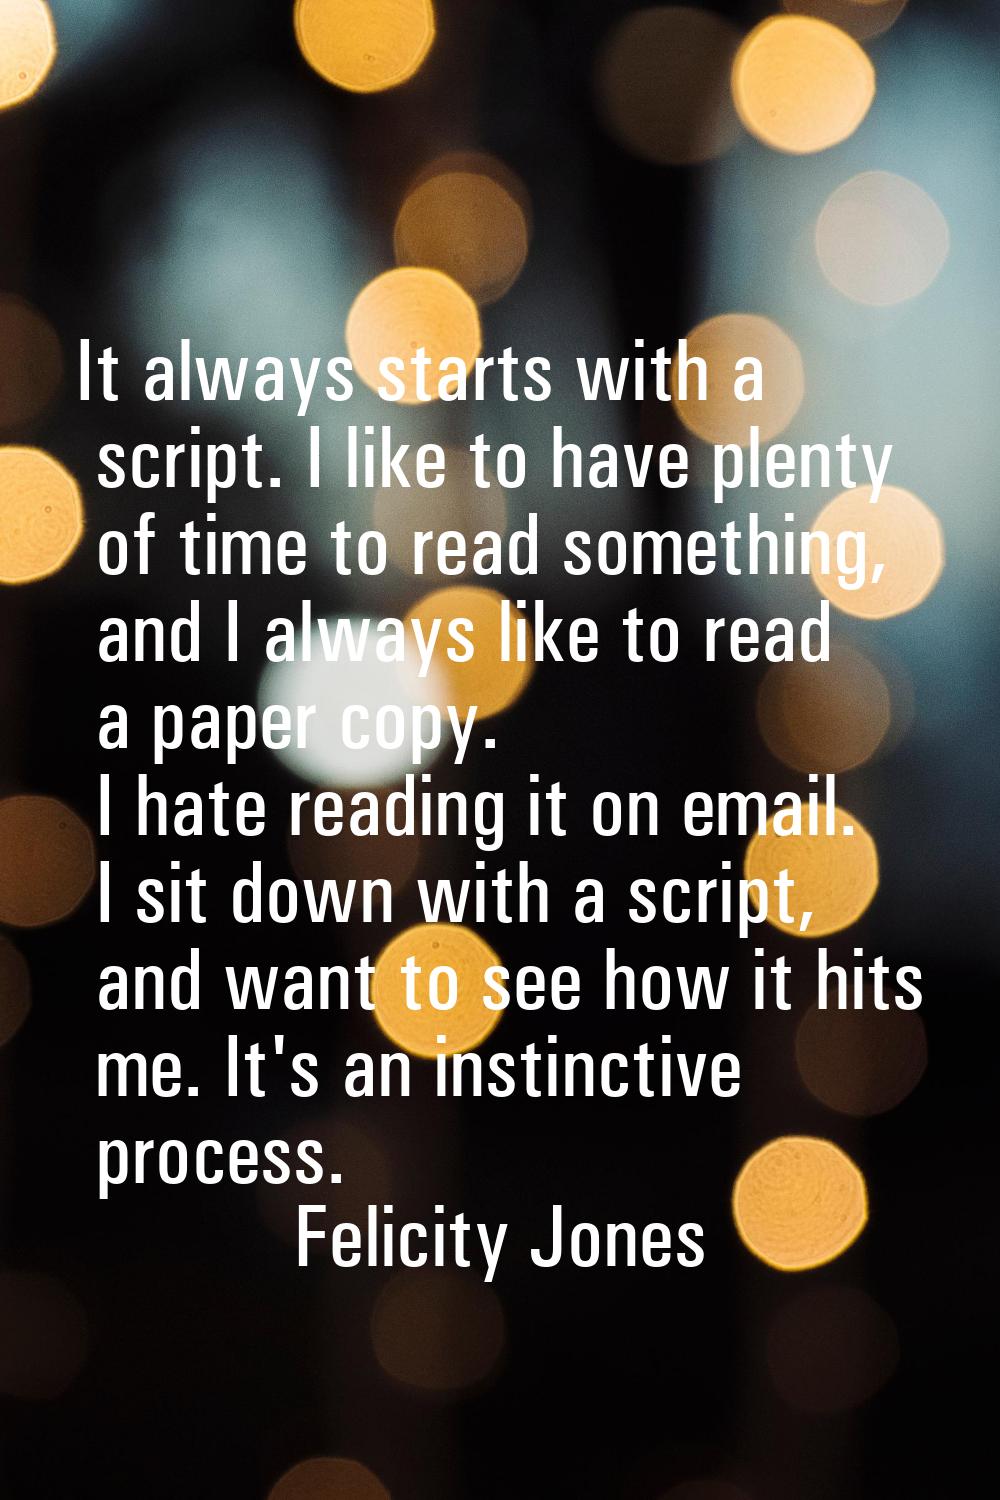 It always starts with a script. I like to have plenty of time to read something, and I always like 